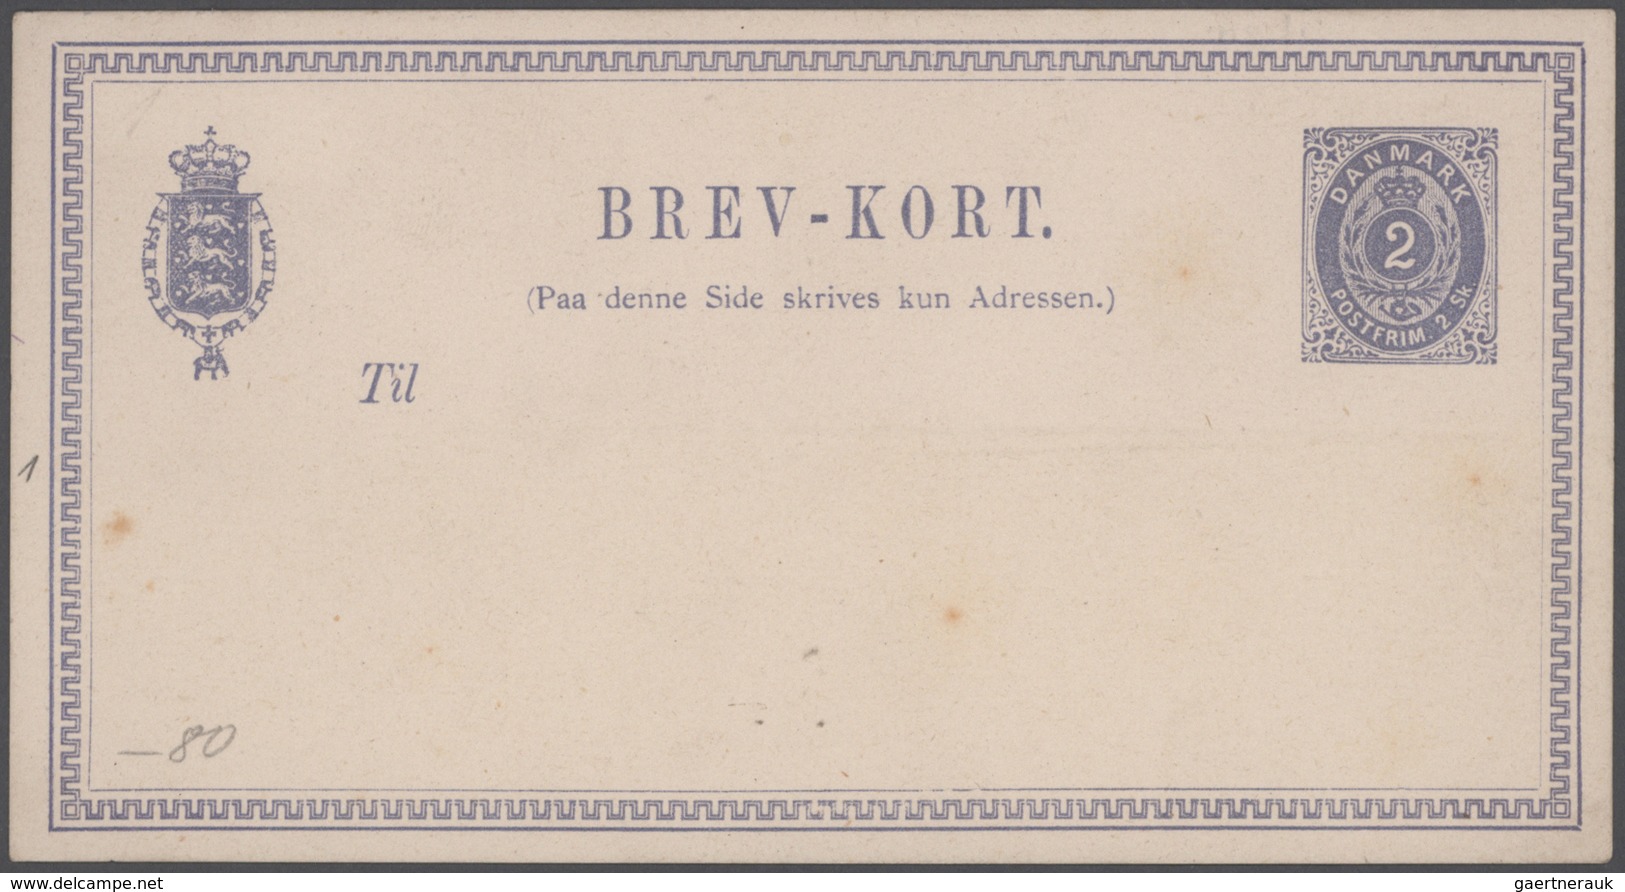 Dänemark - Ganzsachen: 1864/1935 Collection of more than 650 postal stationery items in a big old al